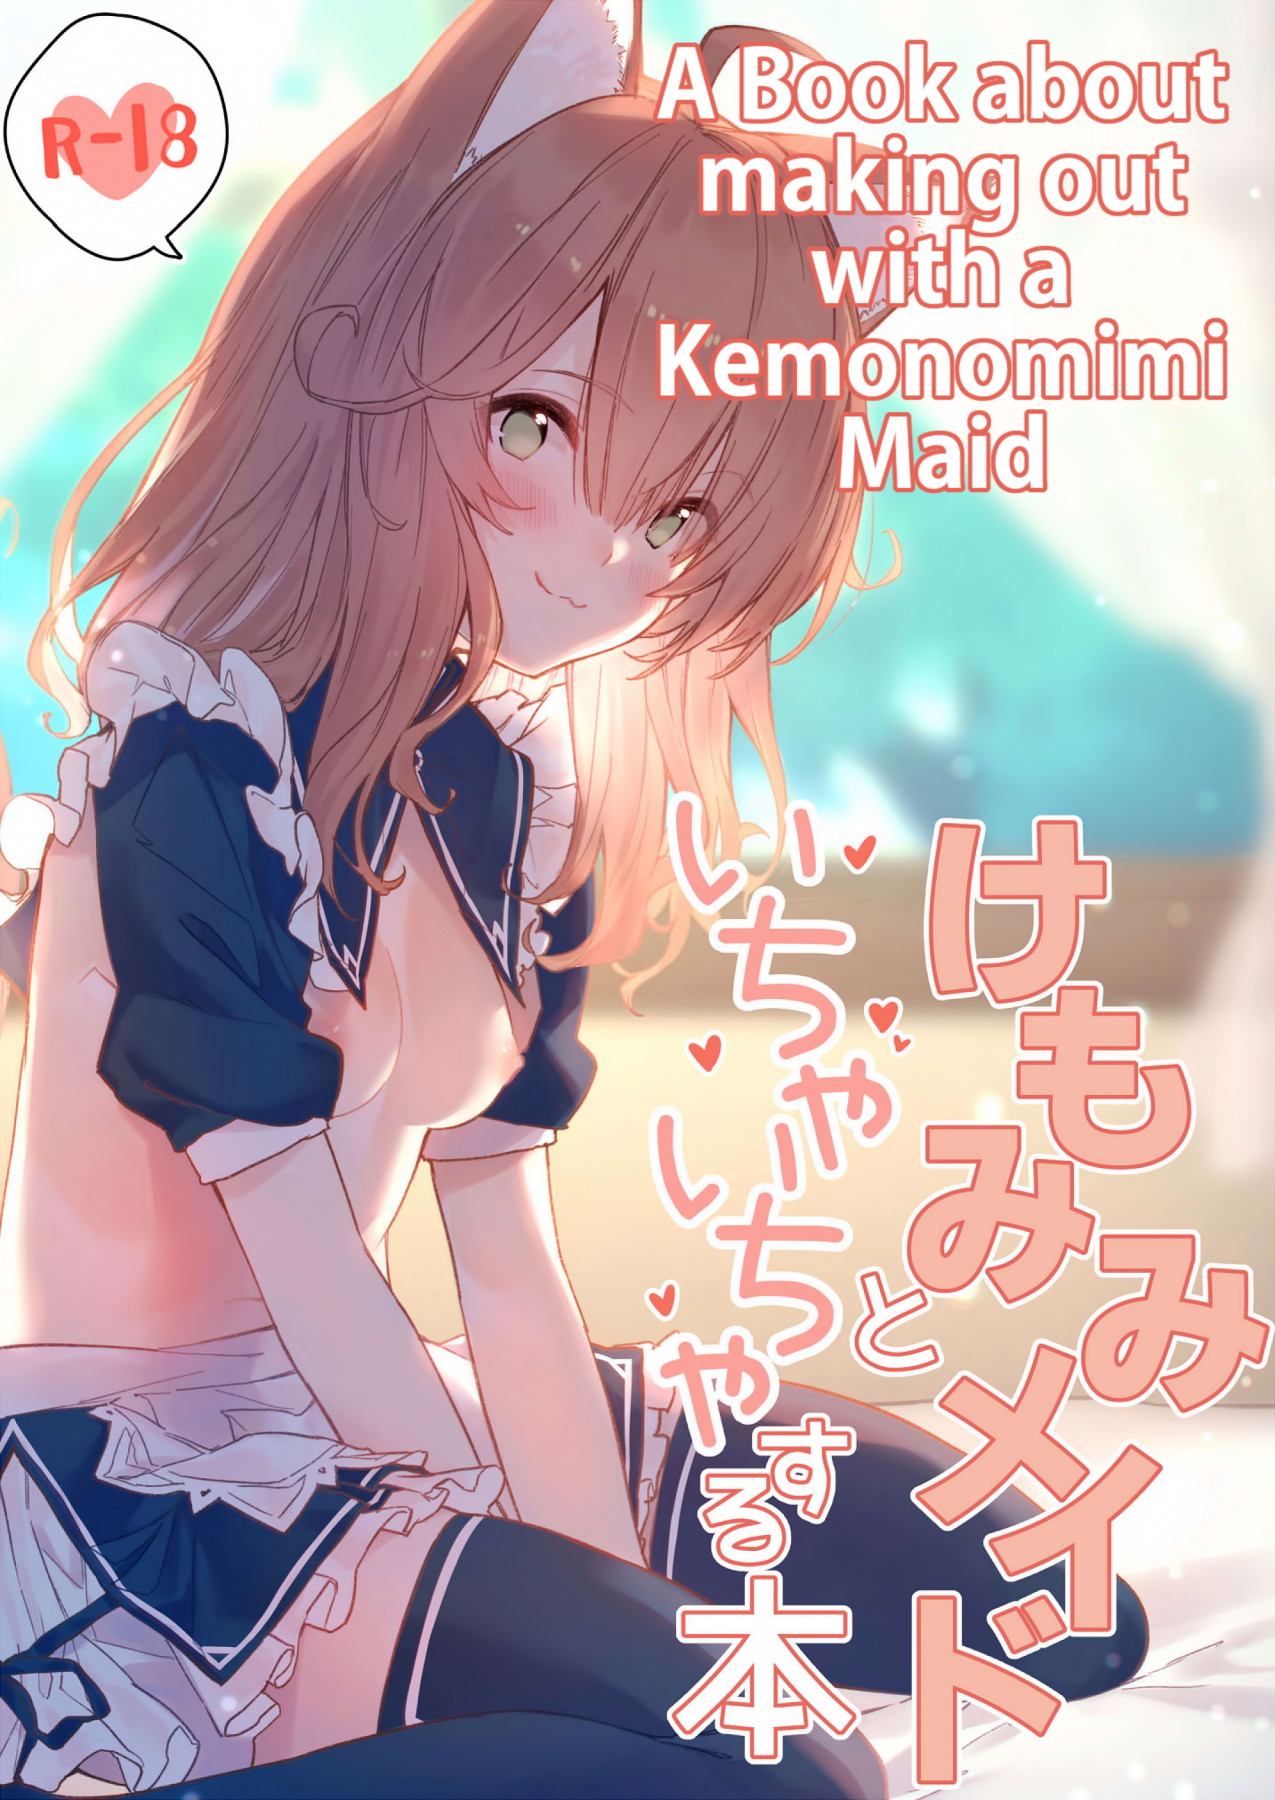 Hentai Manga Comic-A Book About Making Out With a Kemonomimi Maid-Read-1